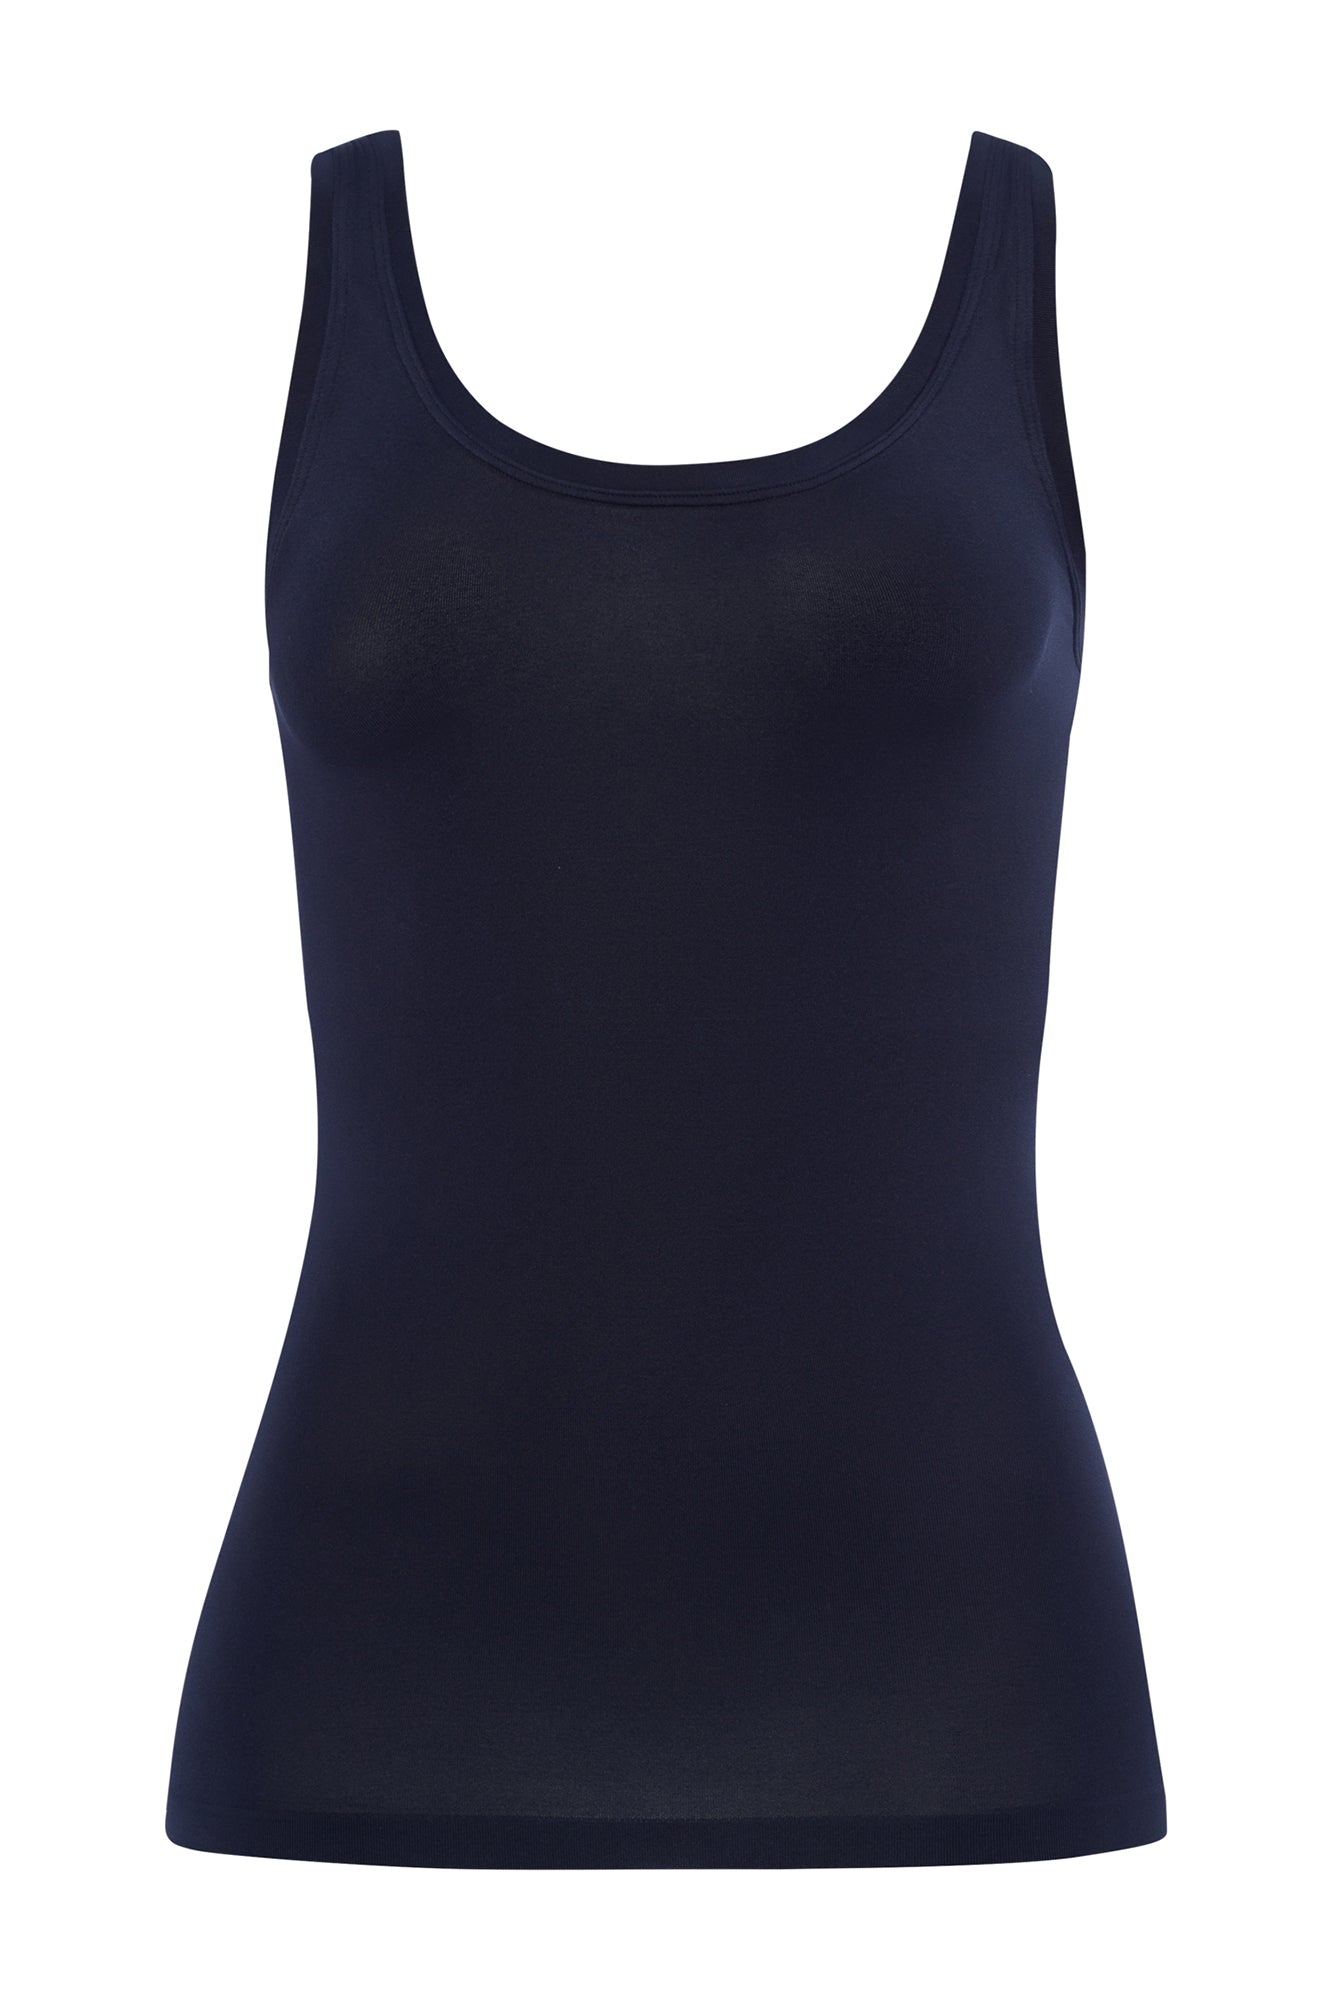 The Touch Feeling Top By HANRO In Deep Navy